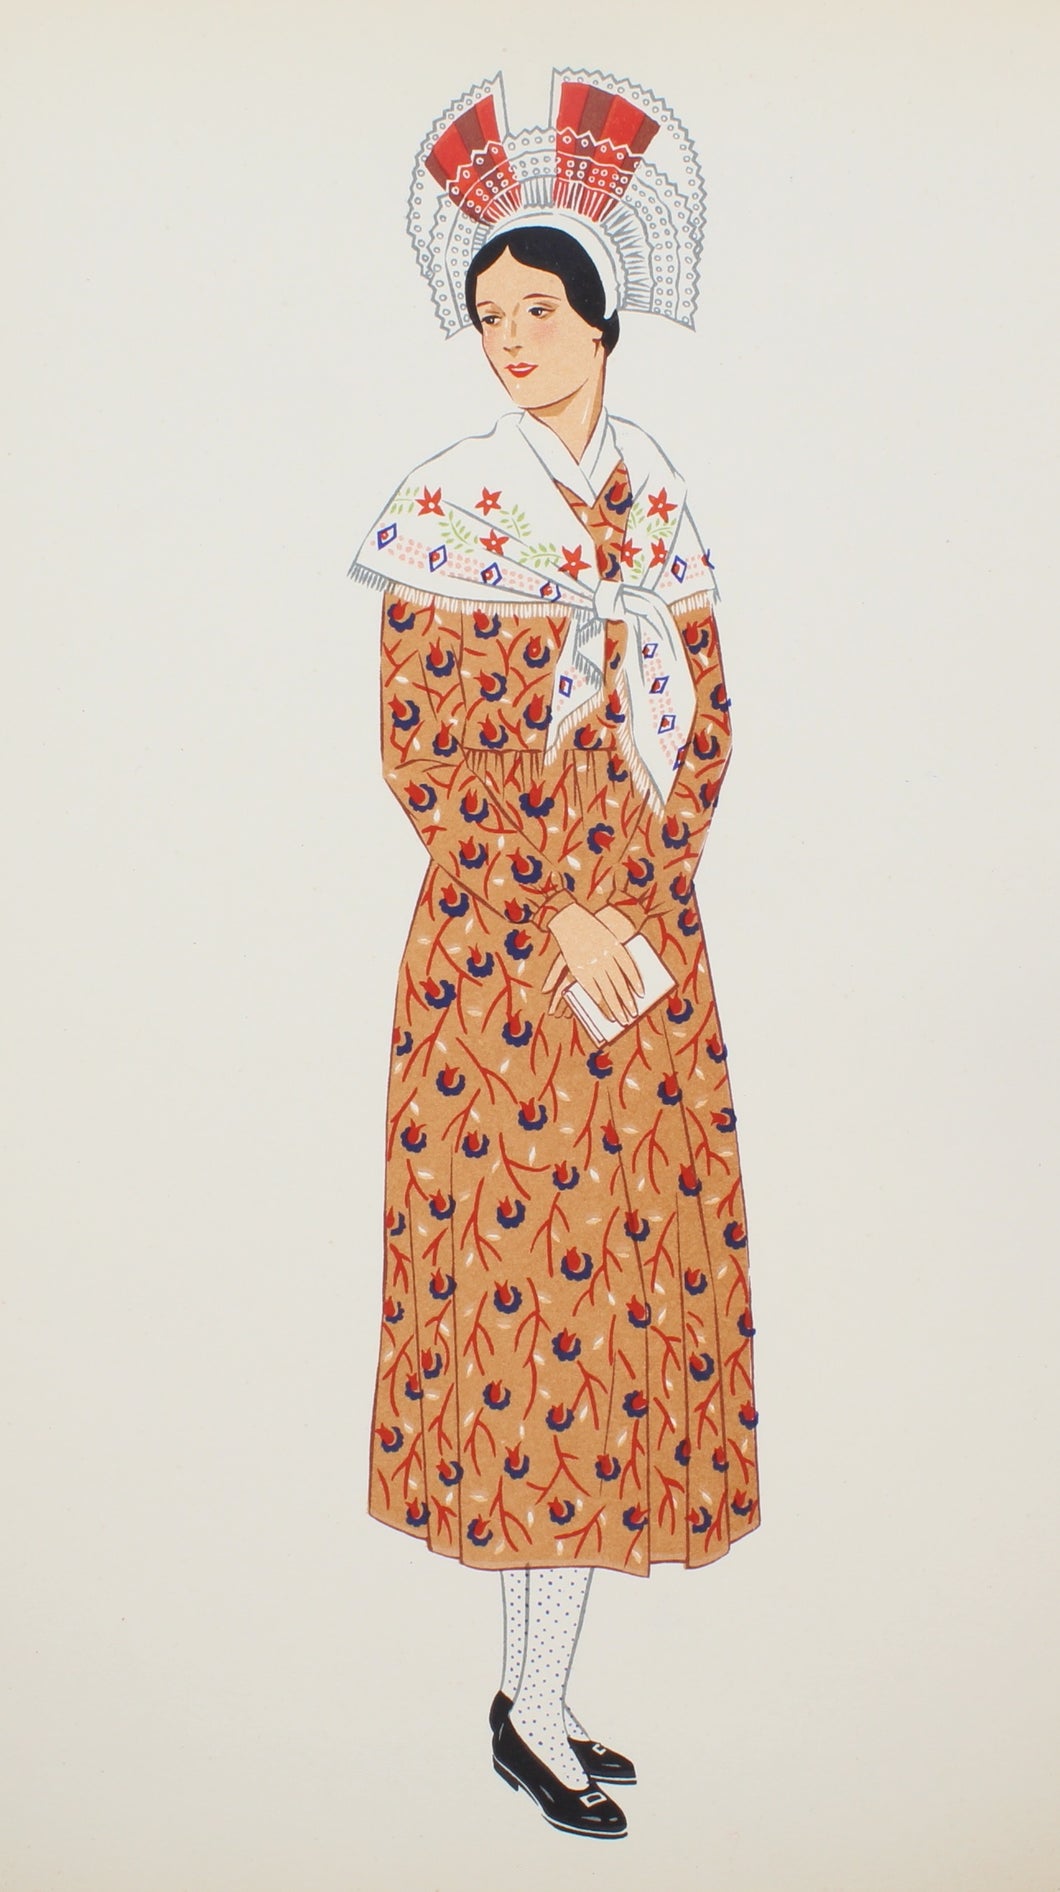 Costume, French Regional, Lepage-Medvey, Woman of Champagne, 1939